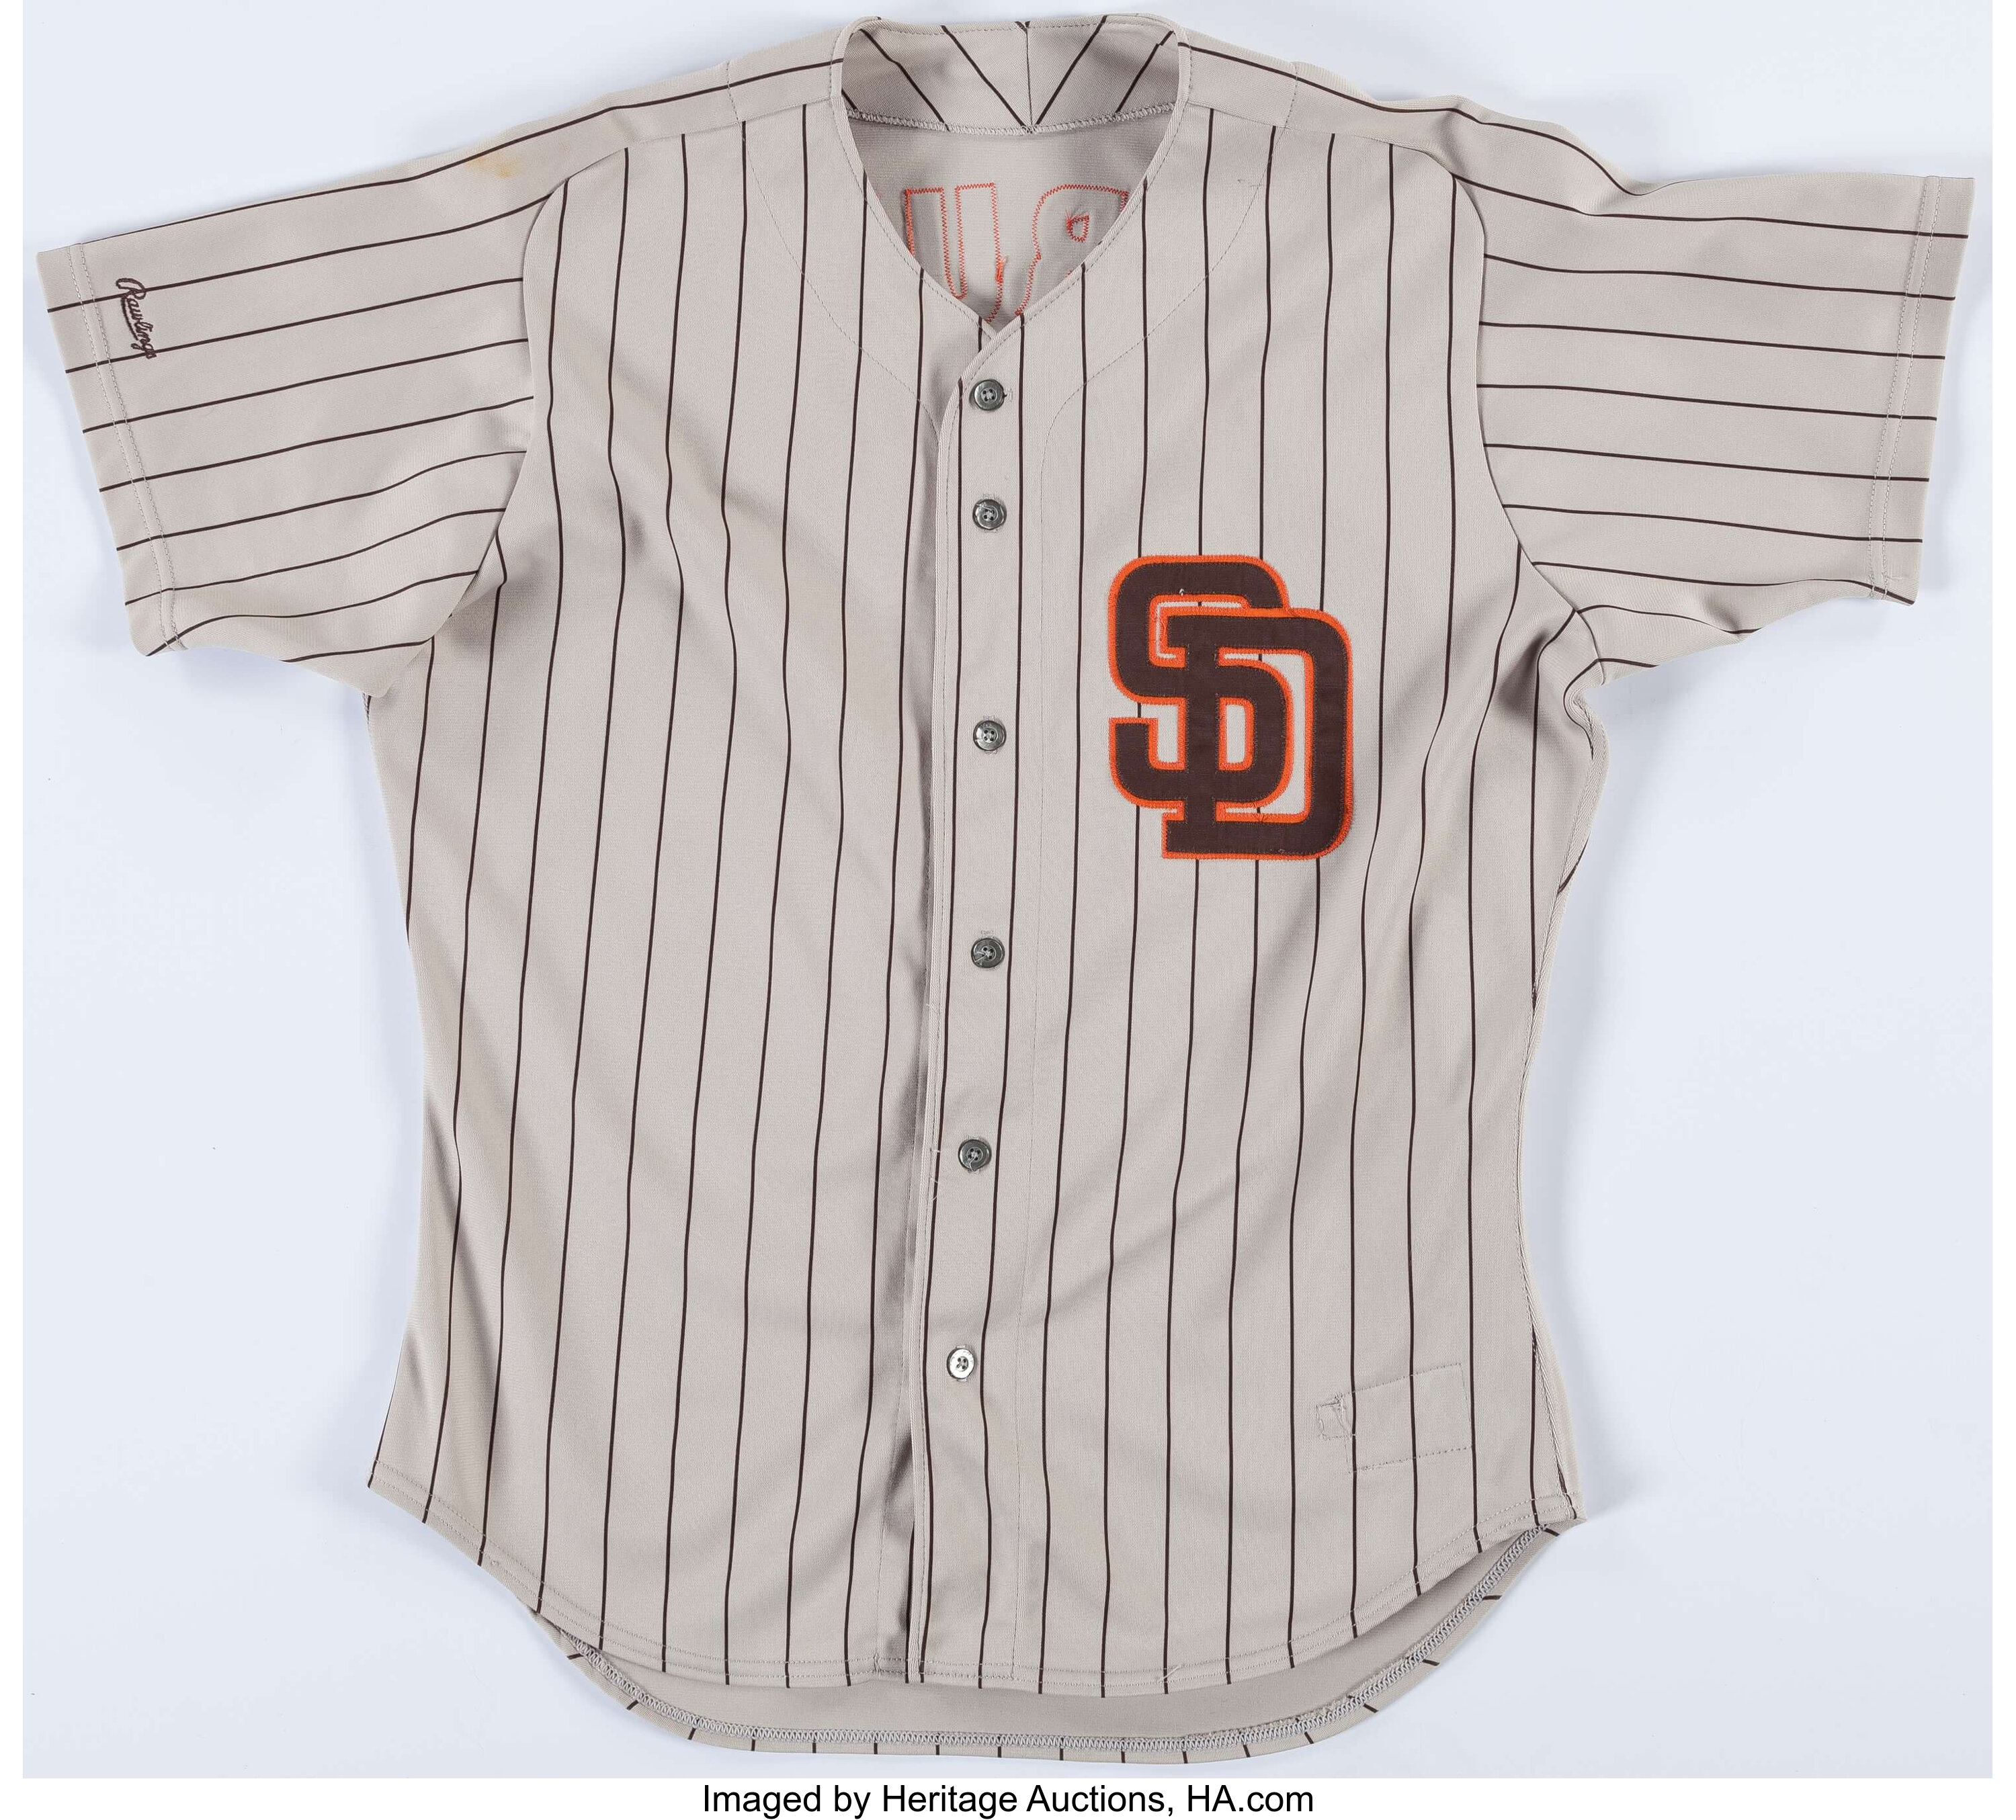 San Diego Padres 1989 uniform artwork, This is a highly det…